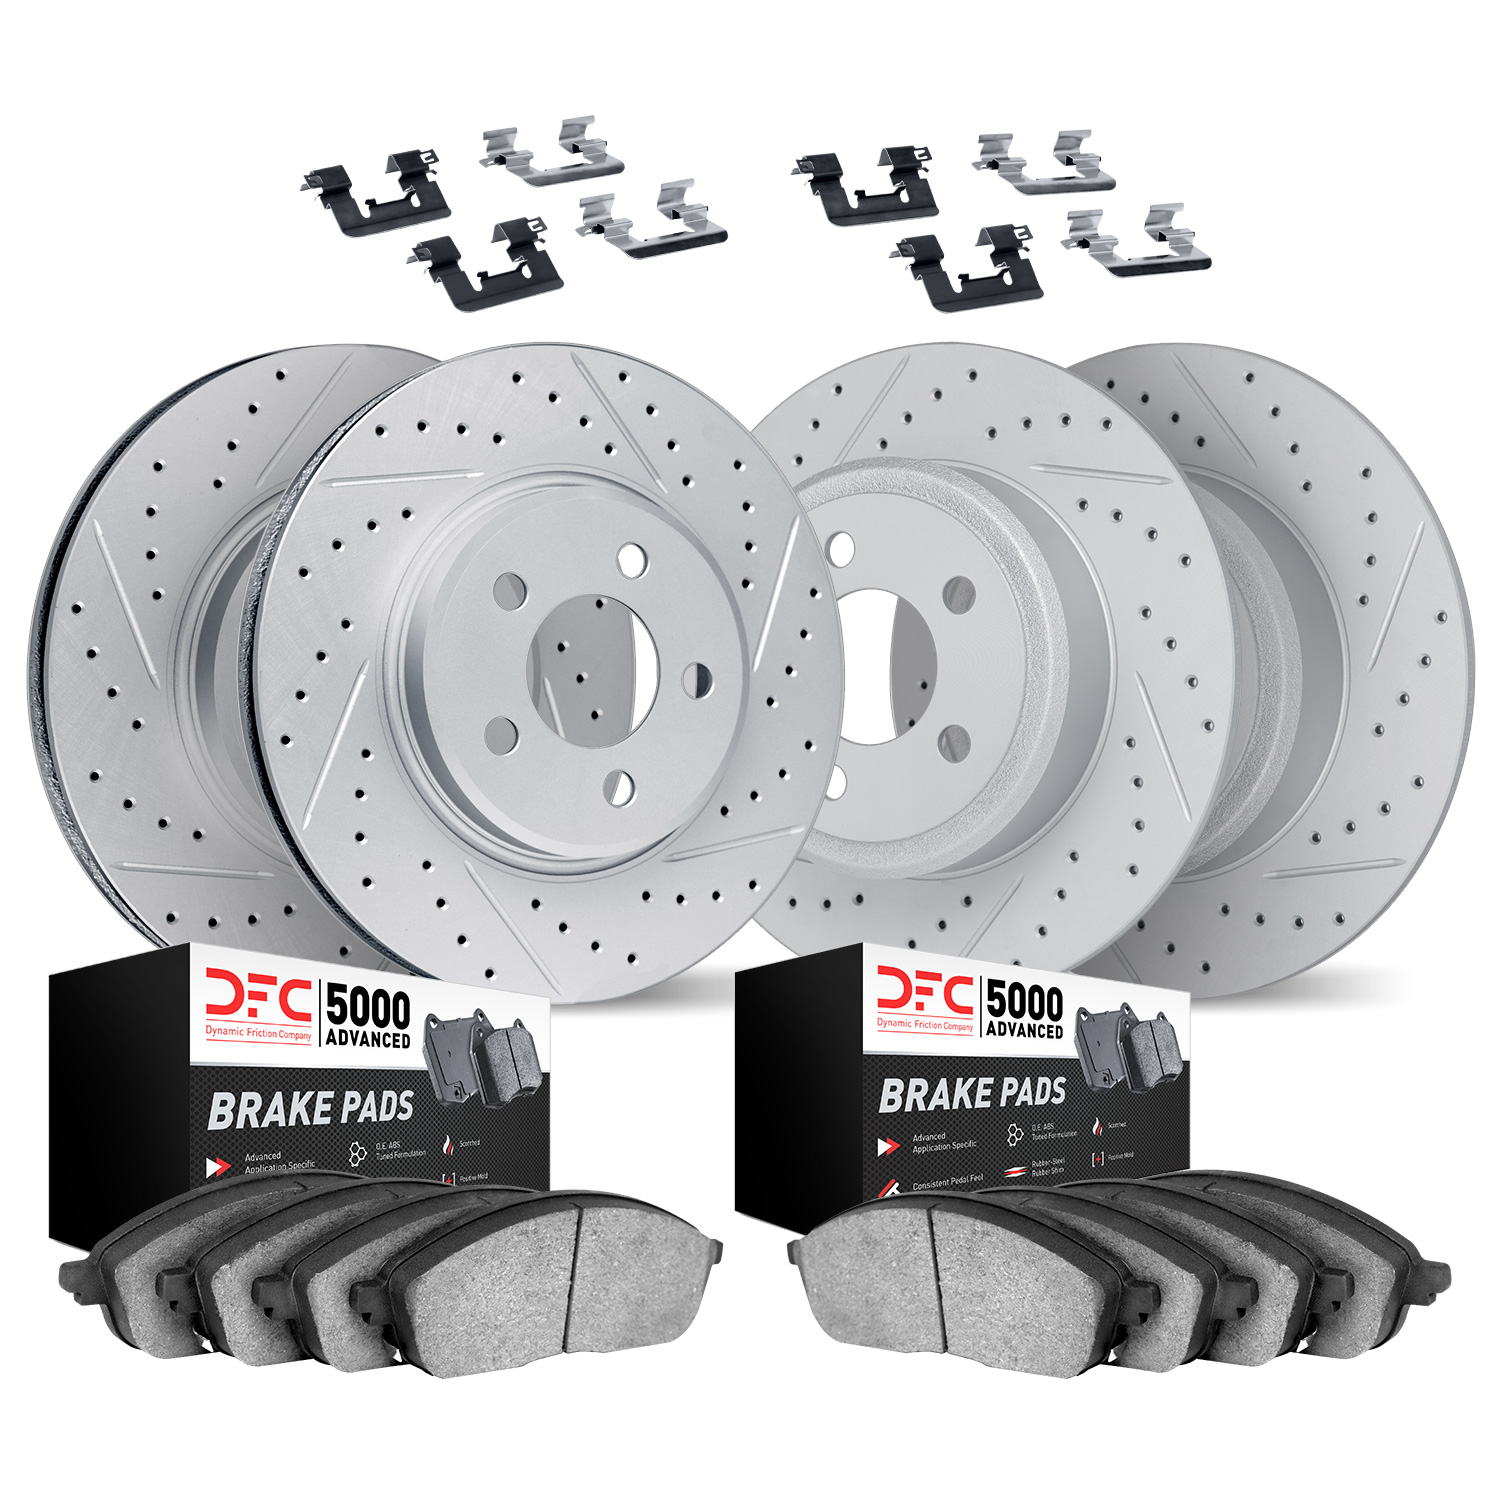 2514-59044 Geoperformance Drilled/Slotted Rotors w/5000 Advanced Brake Pads Kit & Hardware, Fits Select Acura/Honda, Position: F